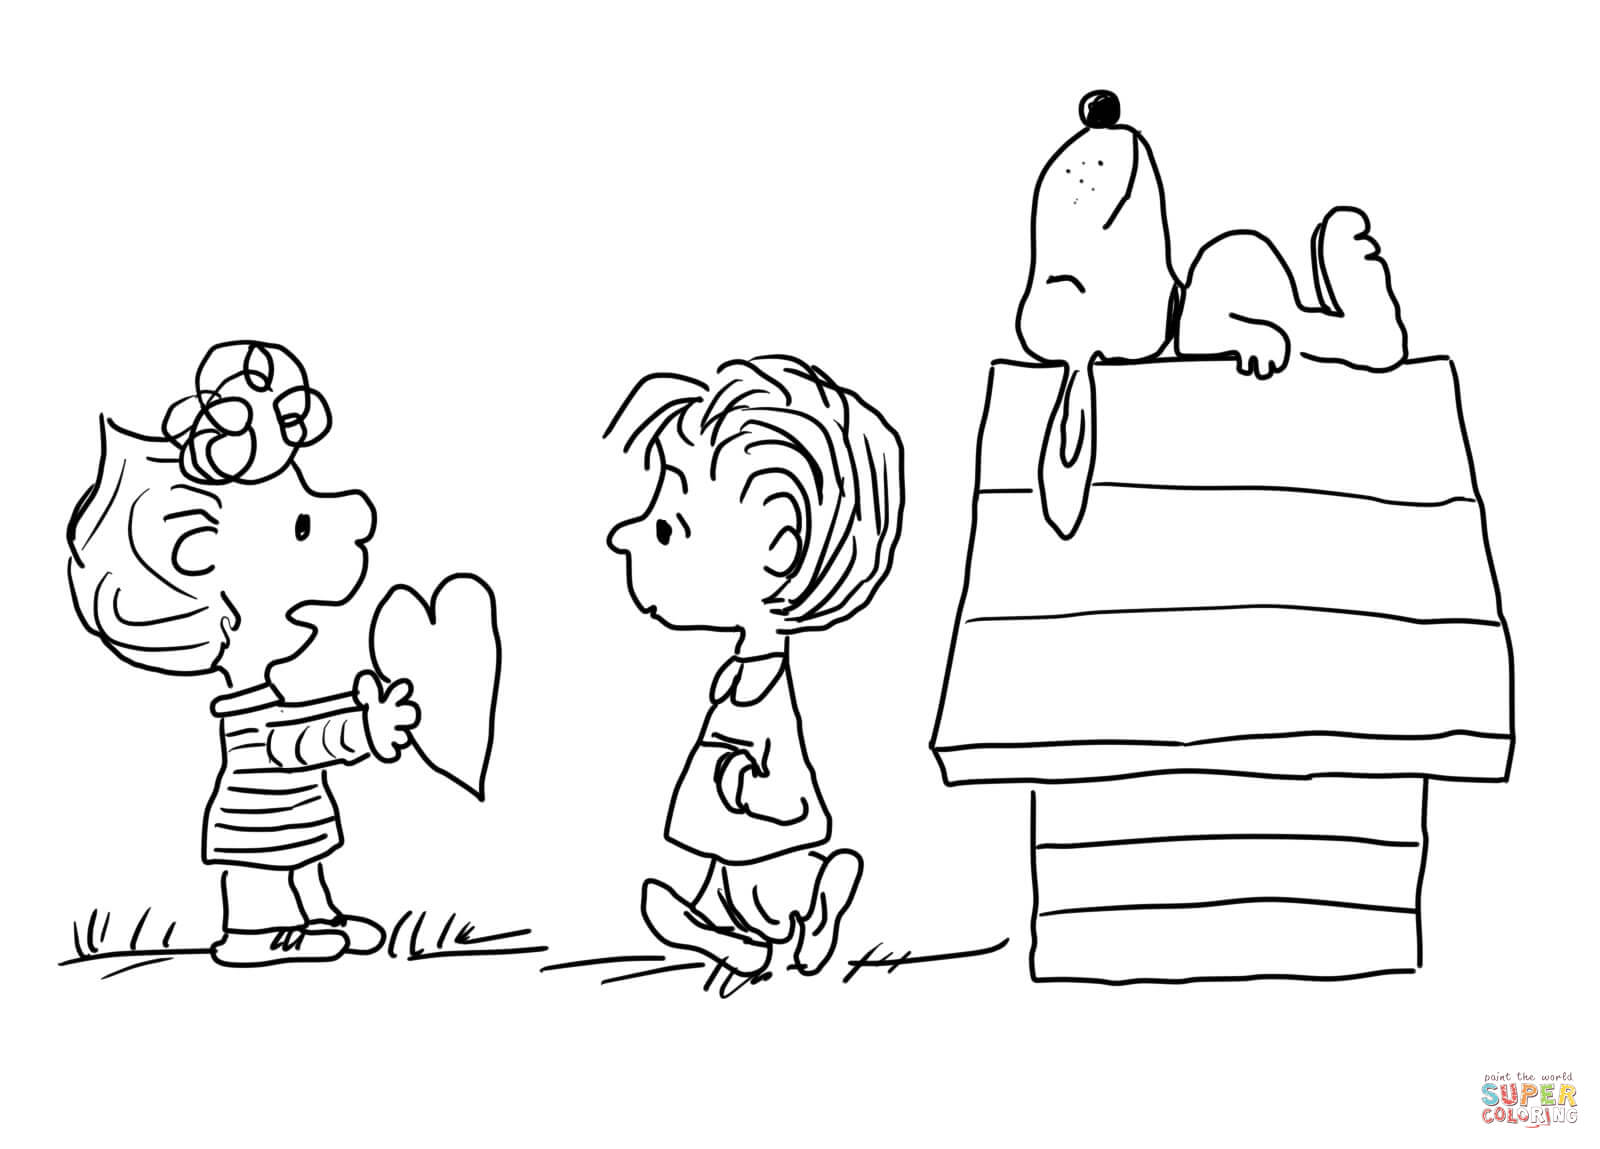 10 Pics of Peanuts Valentine's Day Coloring Pages - Snoopy ...